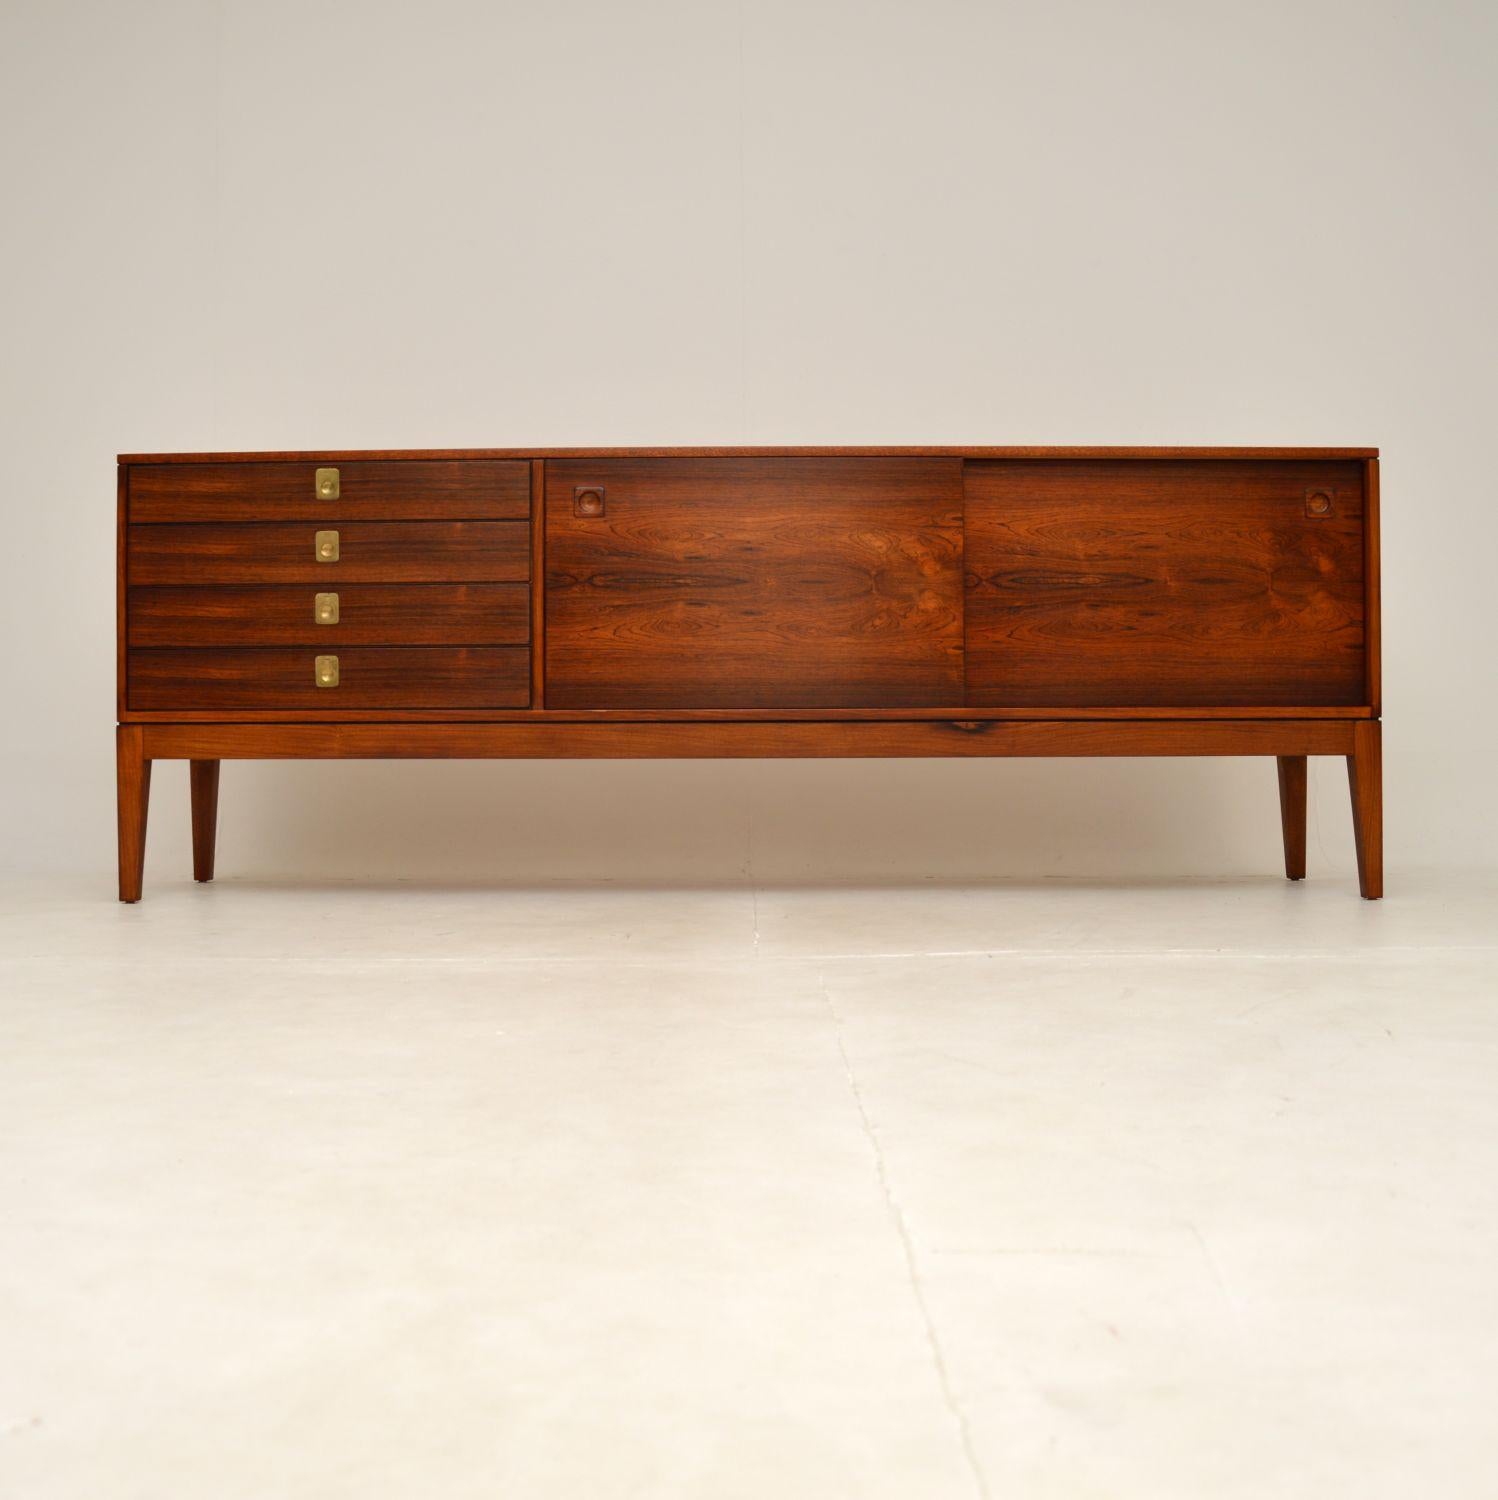 An absolutely stunning and extremely well made vintage sideboard by Robert Heritage for Archie Shine. This was made in England, and dates from the 1960’s.

The quality is outstanding, this sits on beautifully tapered legs, with two sliding doors on